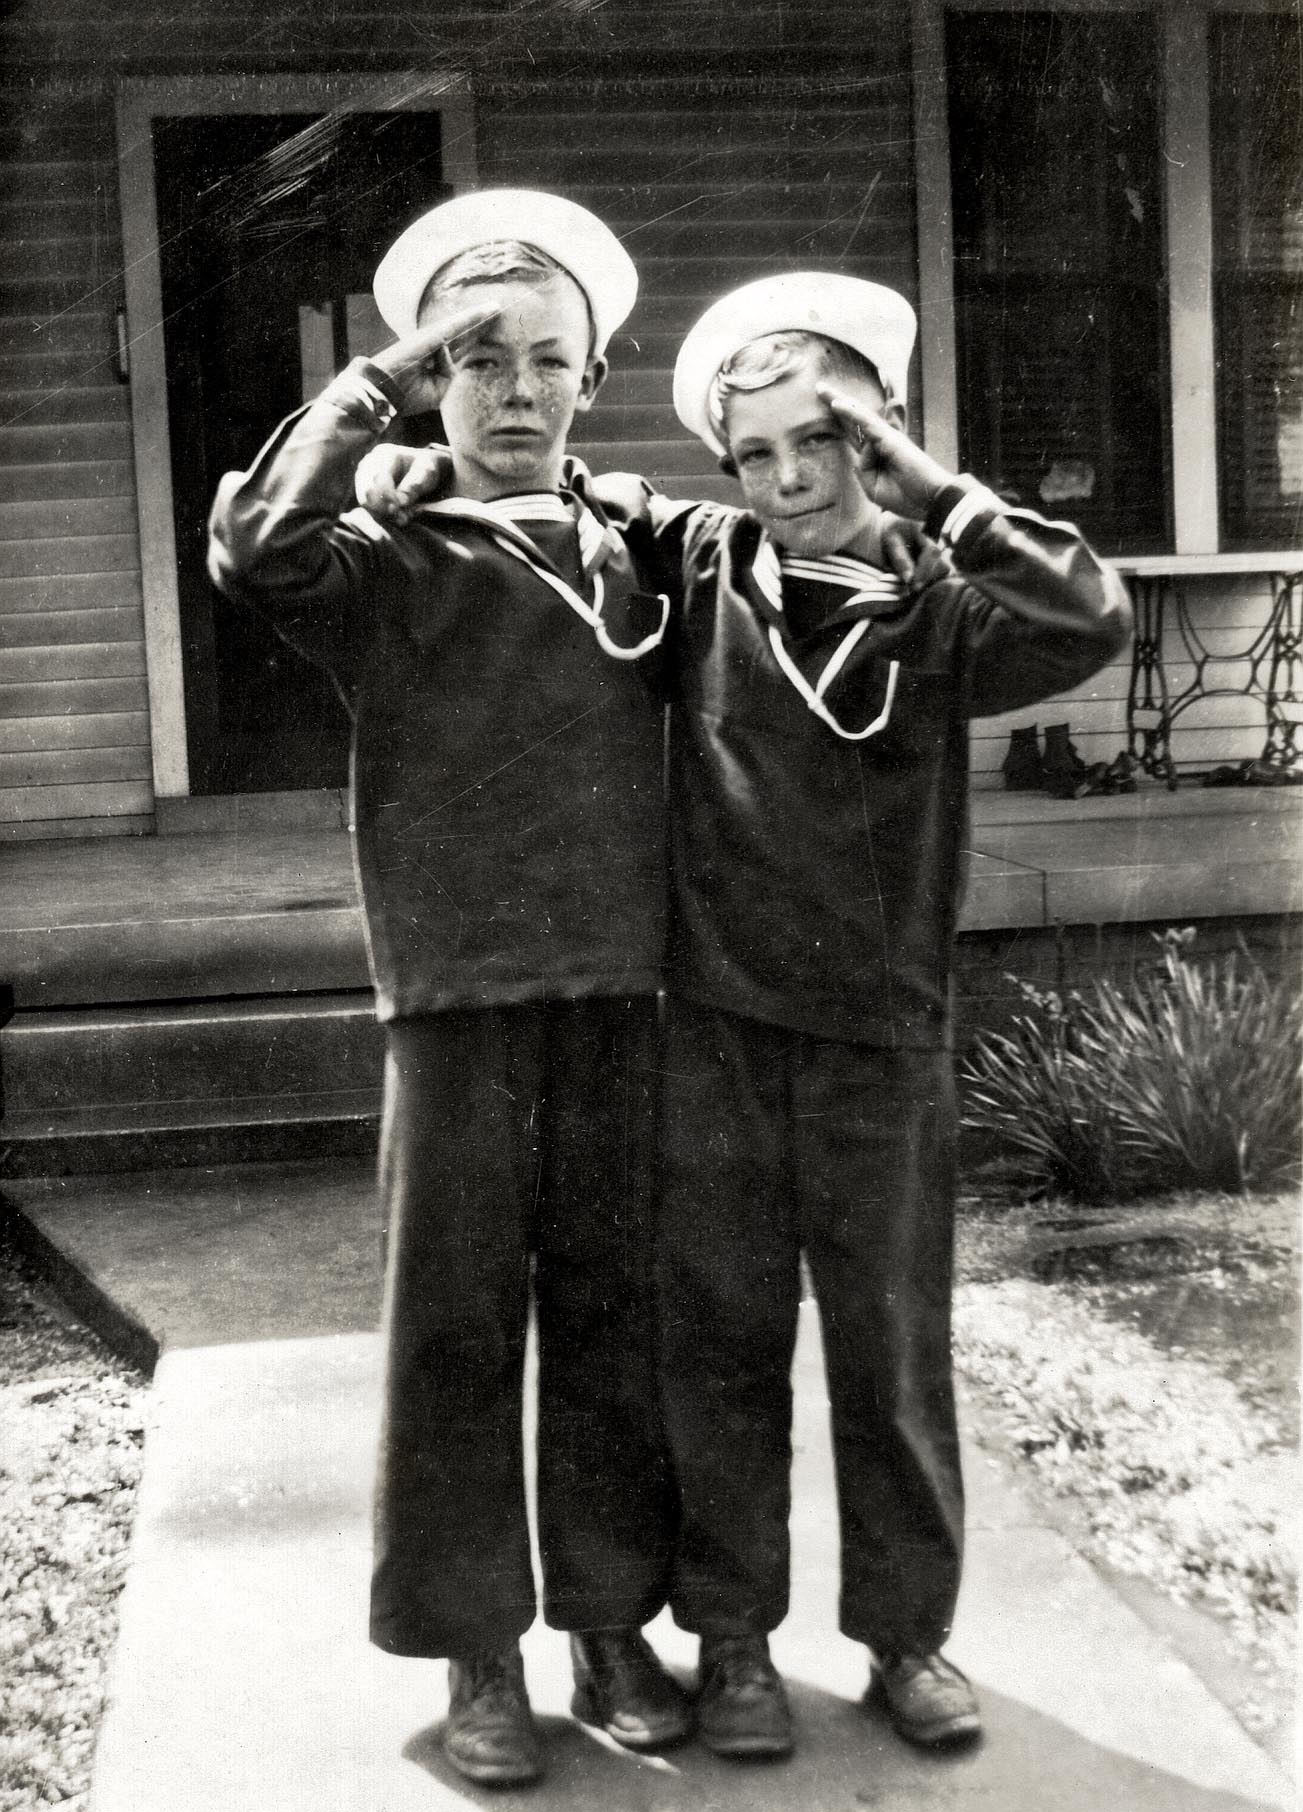 This is my father, John (on right), and his older brother, Rhea, in the summer of 1944.  My father is seven years old, and his brother is nine years old.  I believe this was taken in front of their grandmother's house in Whiteville (Hardeman County), Tennessee. View full size.